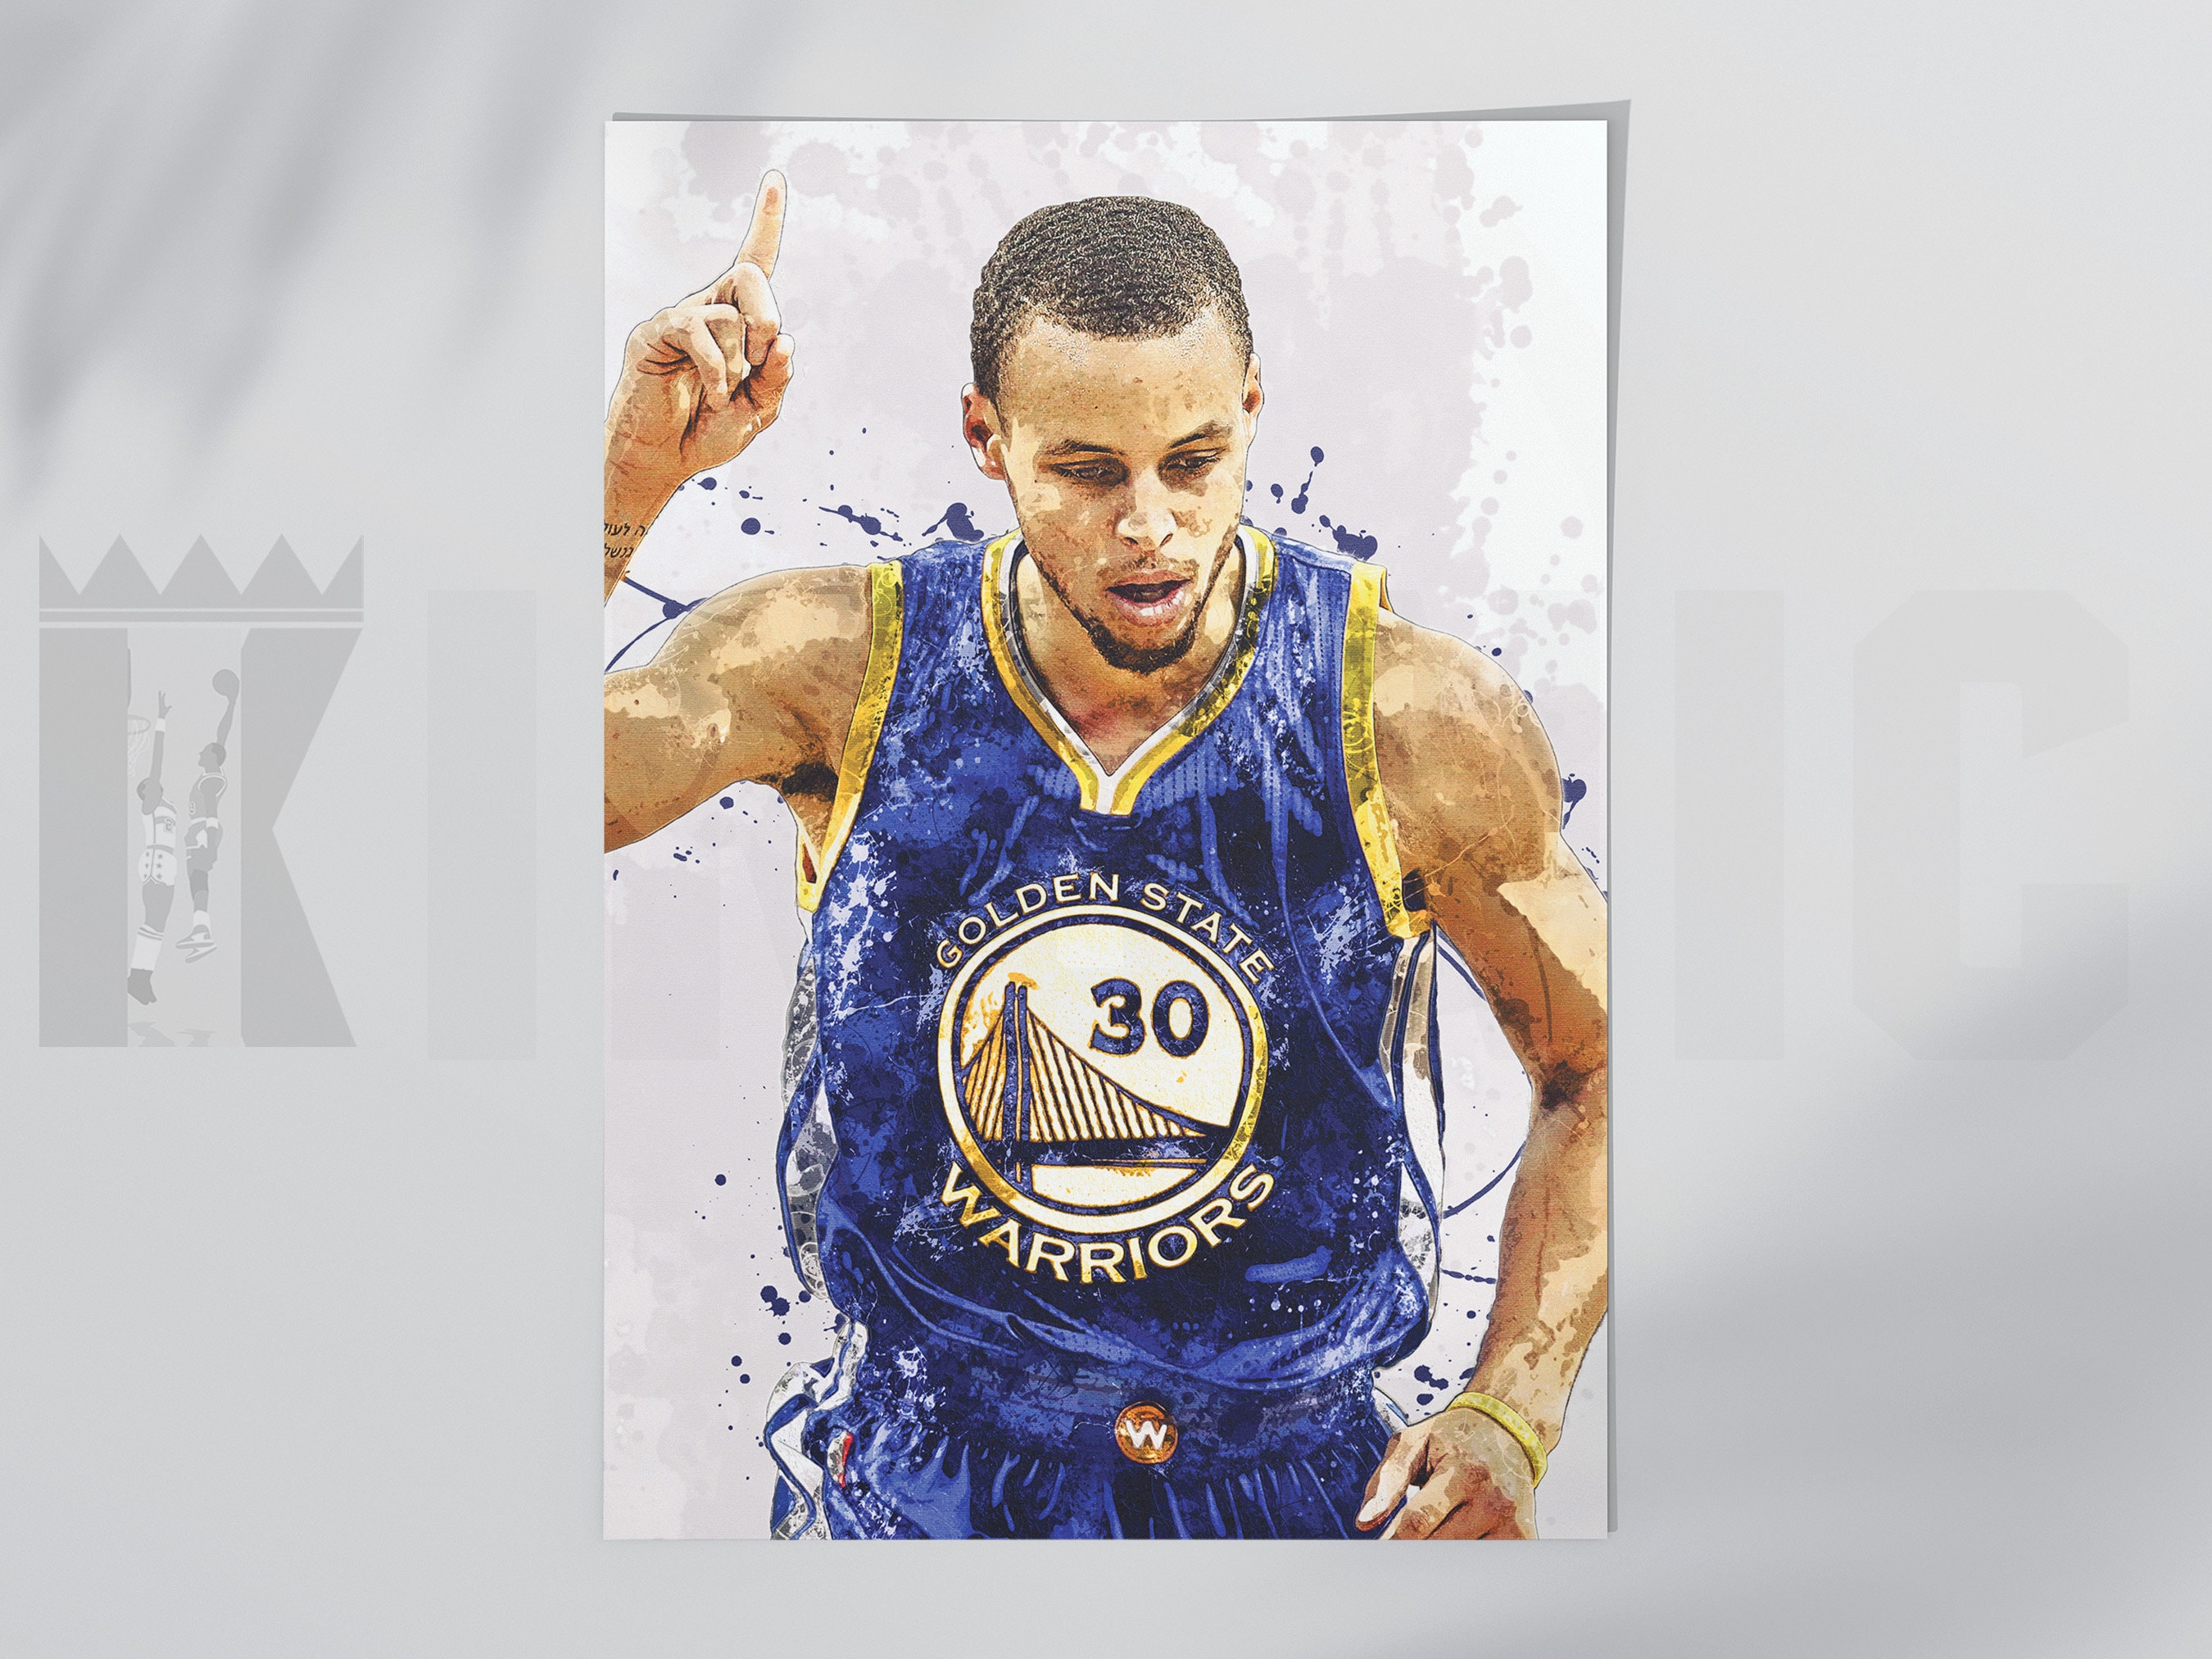 Stephen Curry basketball Player drawing print & Poster 